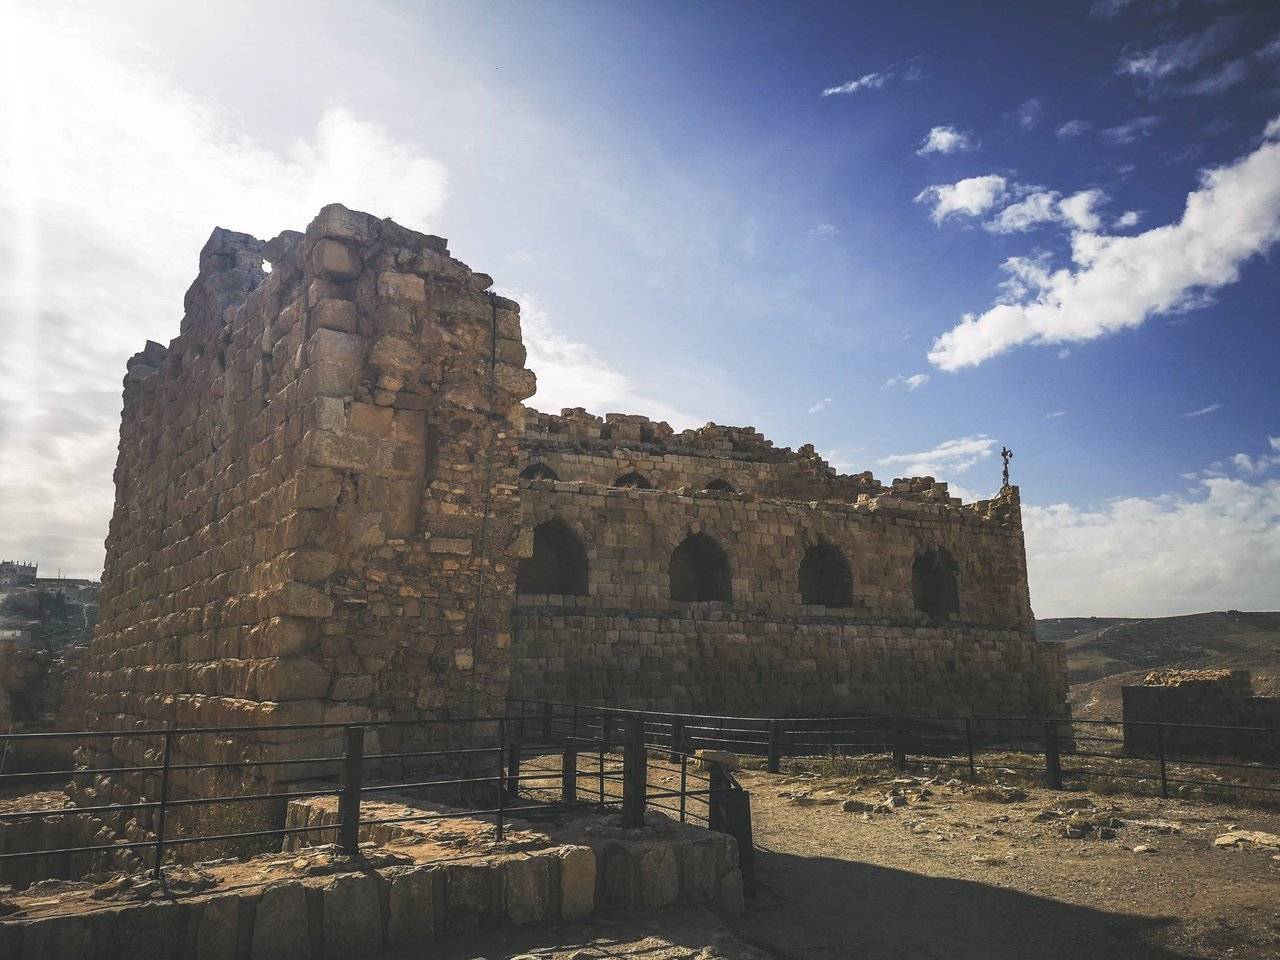   The ruins of palace in al-Karak castle. Photo by Alis Monte [CC BY-SA 4.0], via Connecting the Dots